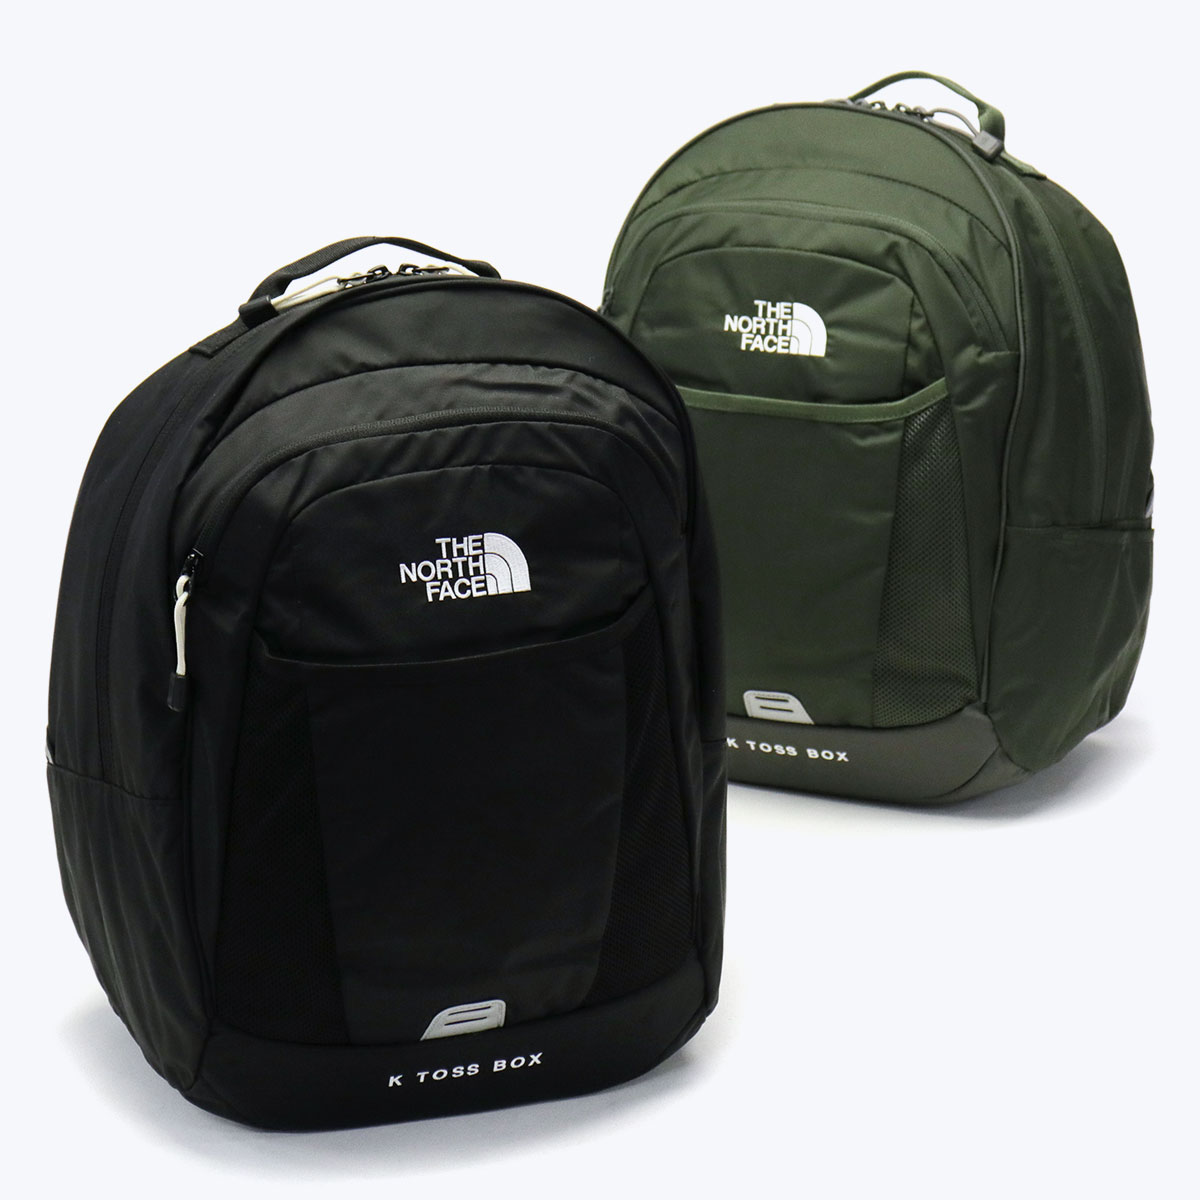 The north face K TOSS BOX リュック - バッグ